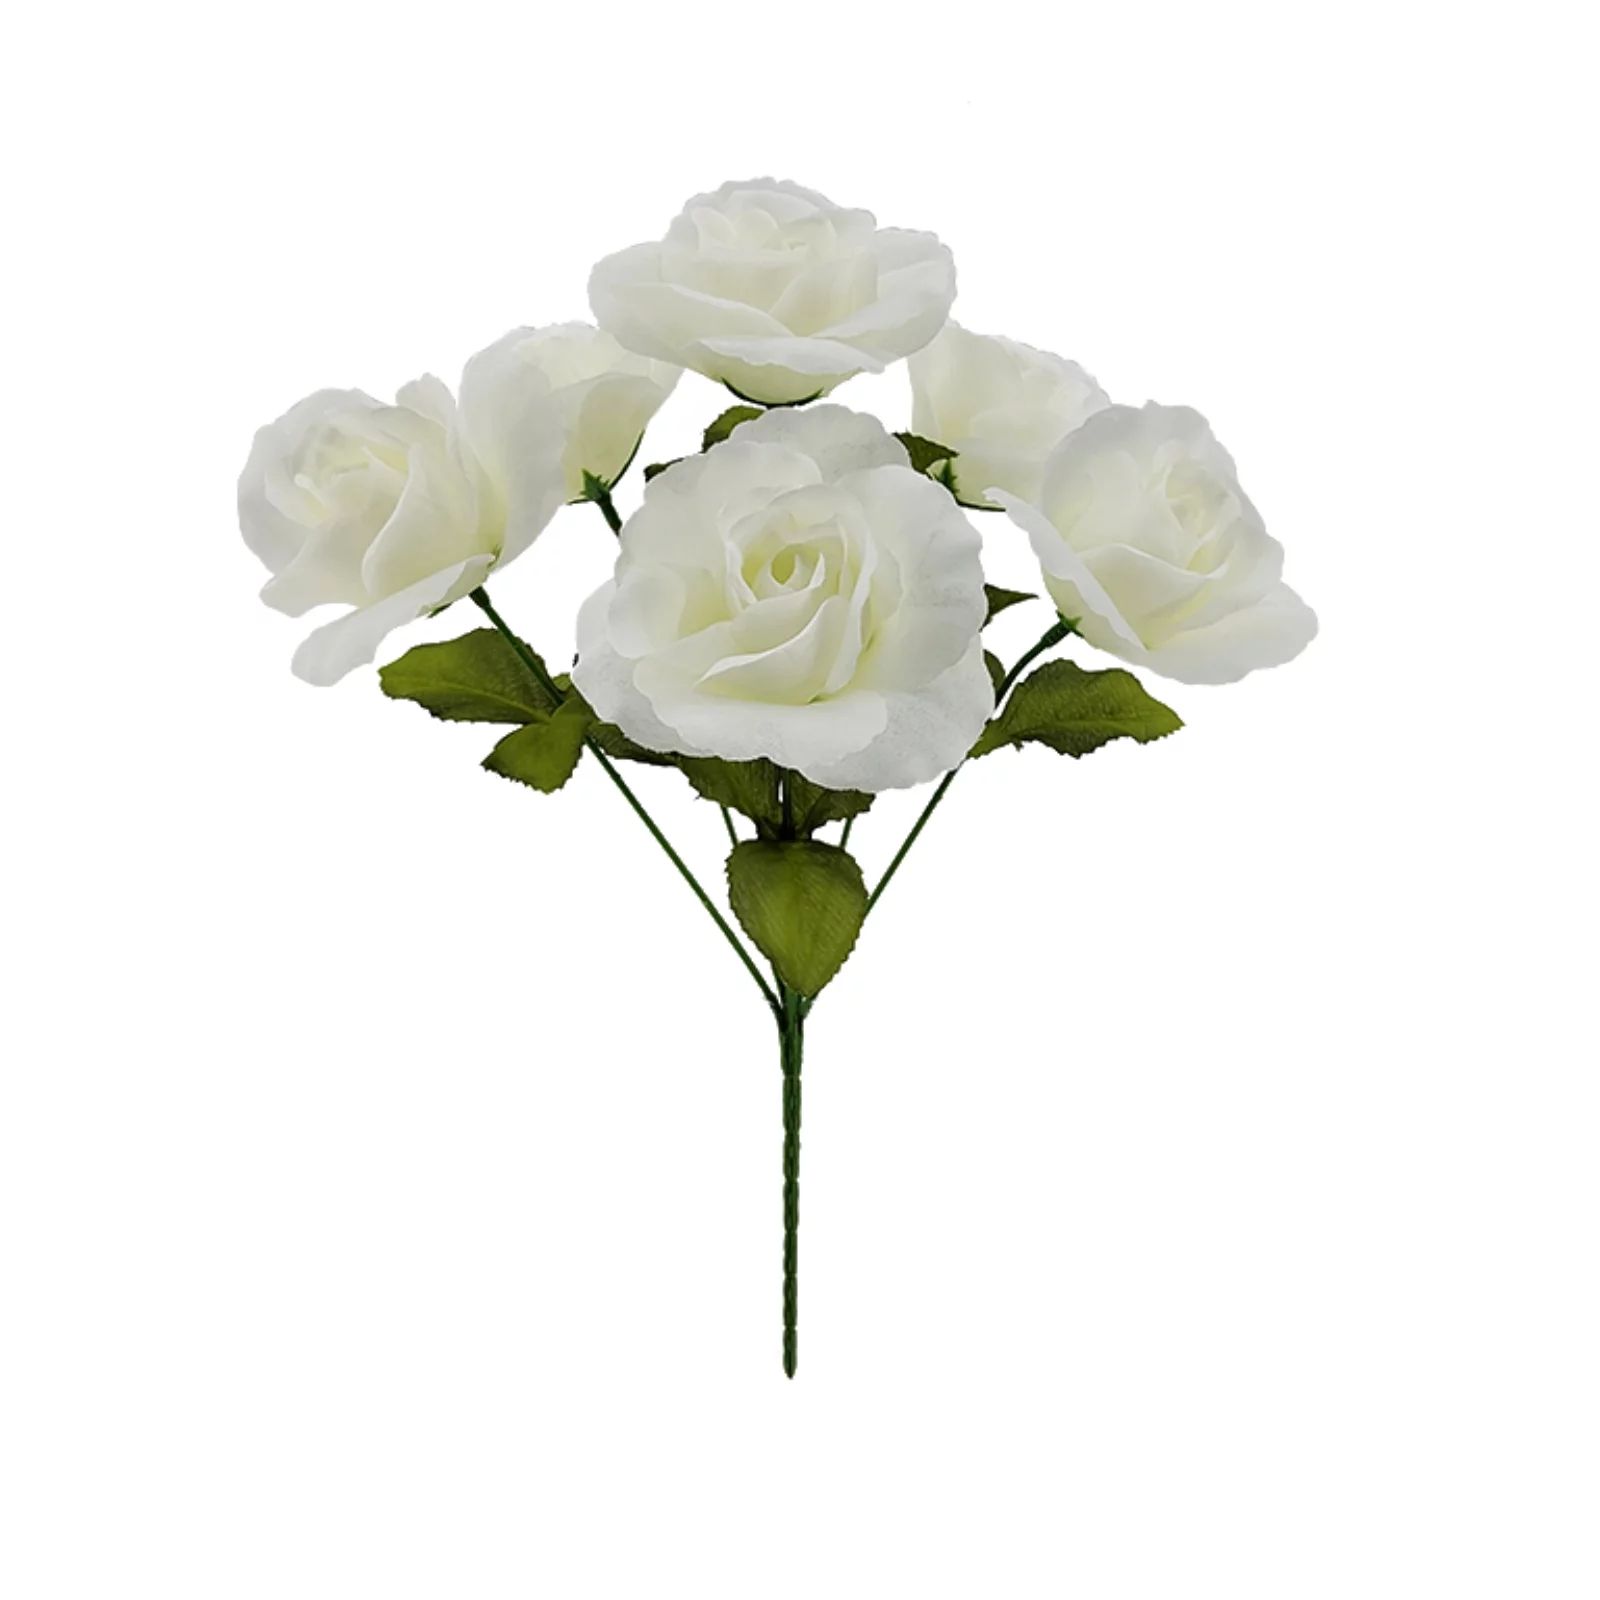 Mainstays Indoor Artificial Sweet Rose Flower Pick, White Color, Assembled Height: 14" | Walmart (US)